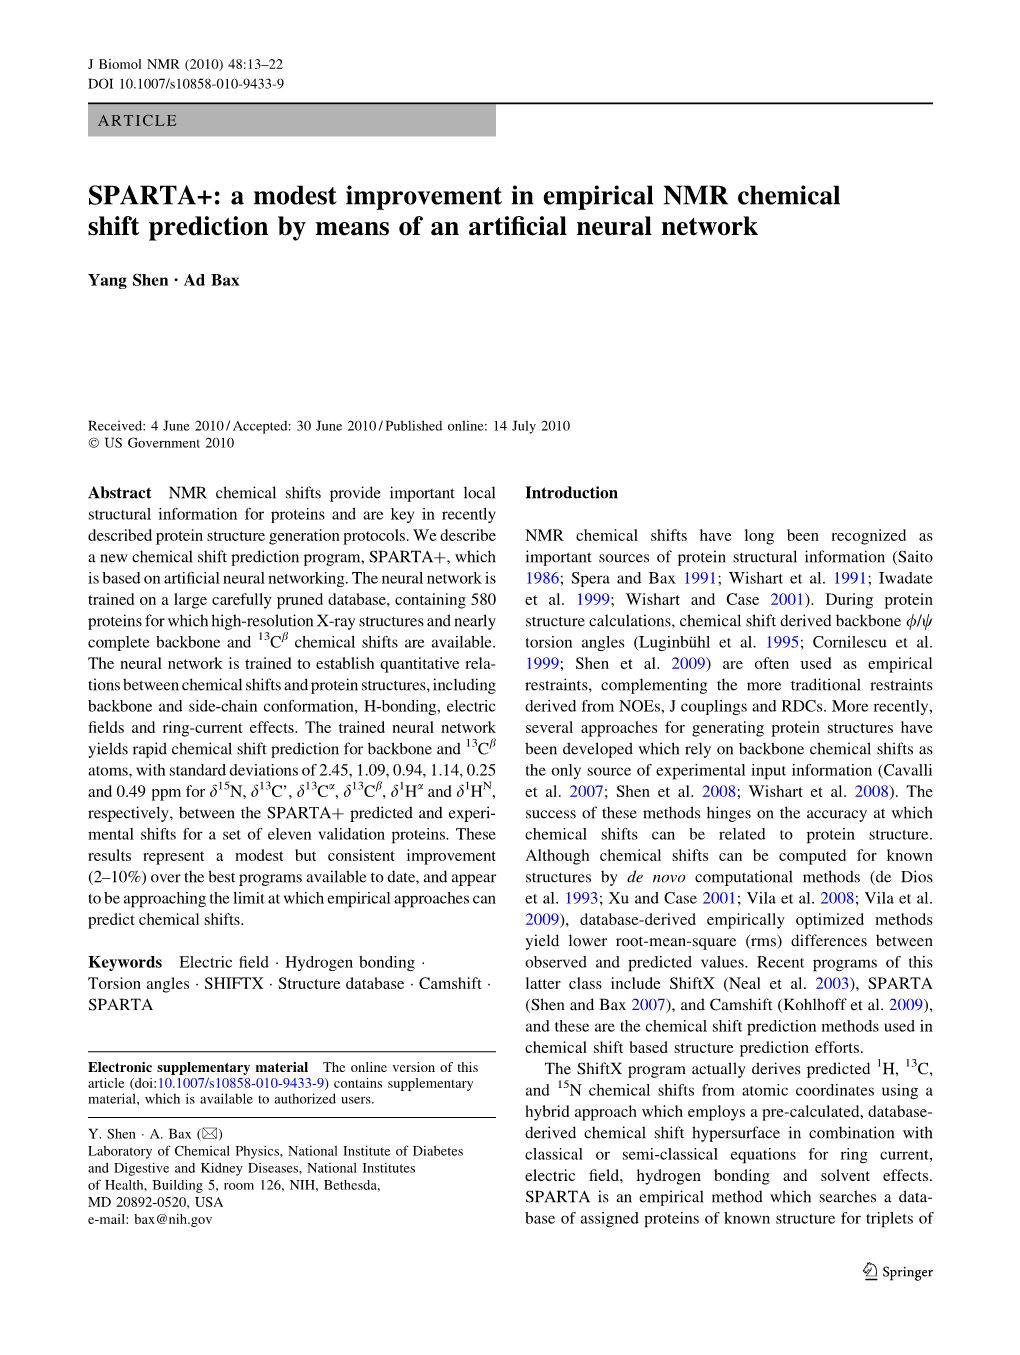 A Modest Improvement in Empirical NMR Chemical Shift Prediction by Means of an Artiﬁcial Neural Network